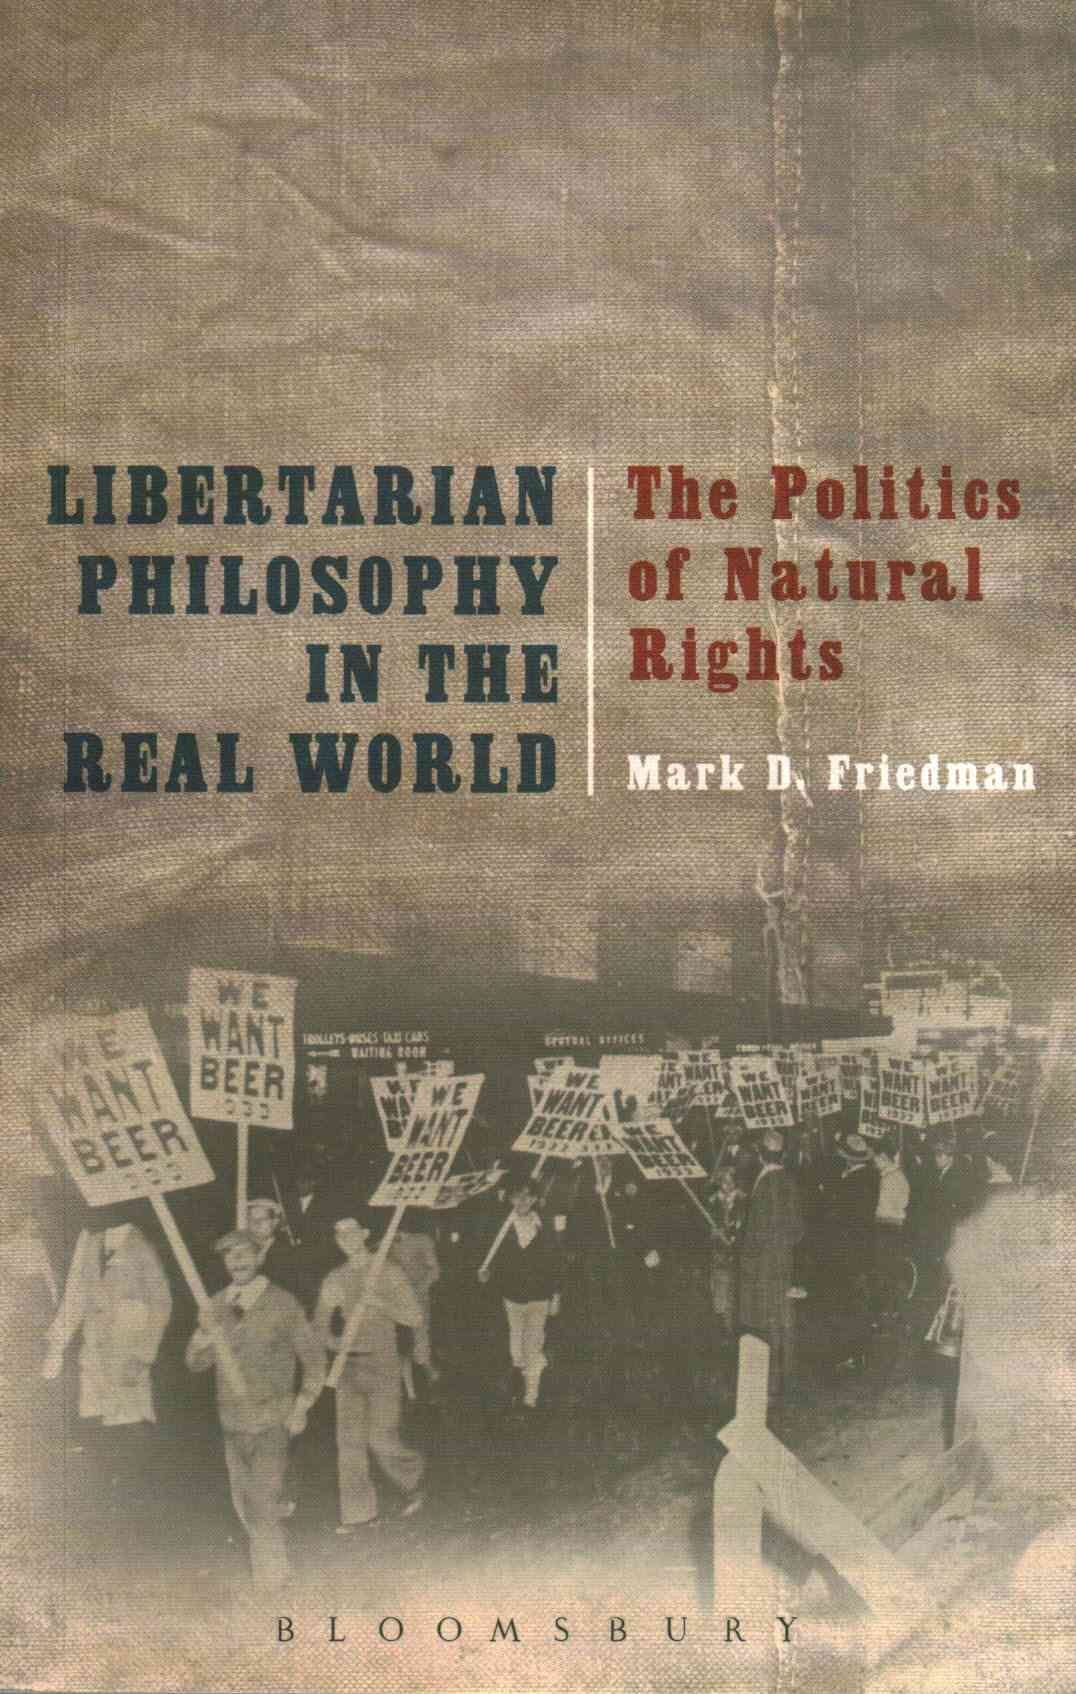 Libertarian Philosophy in the Real World